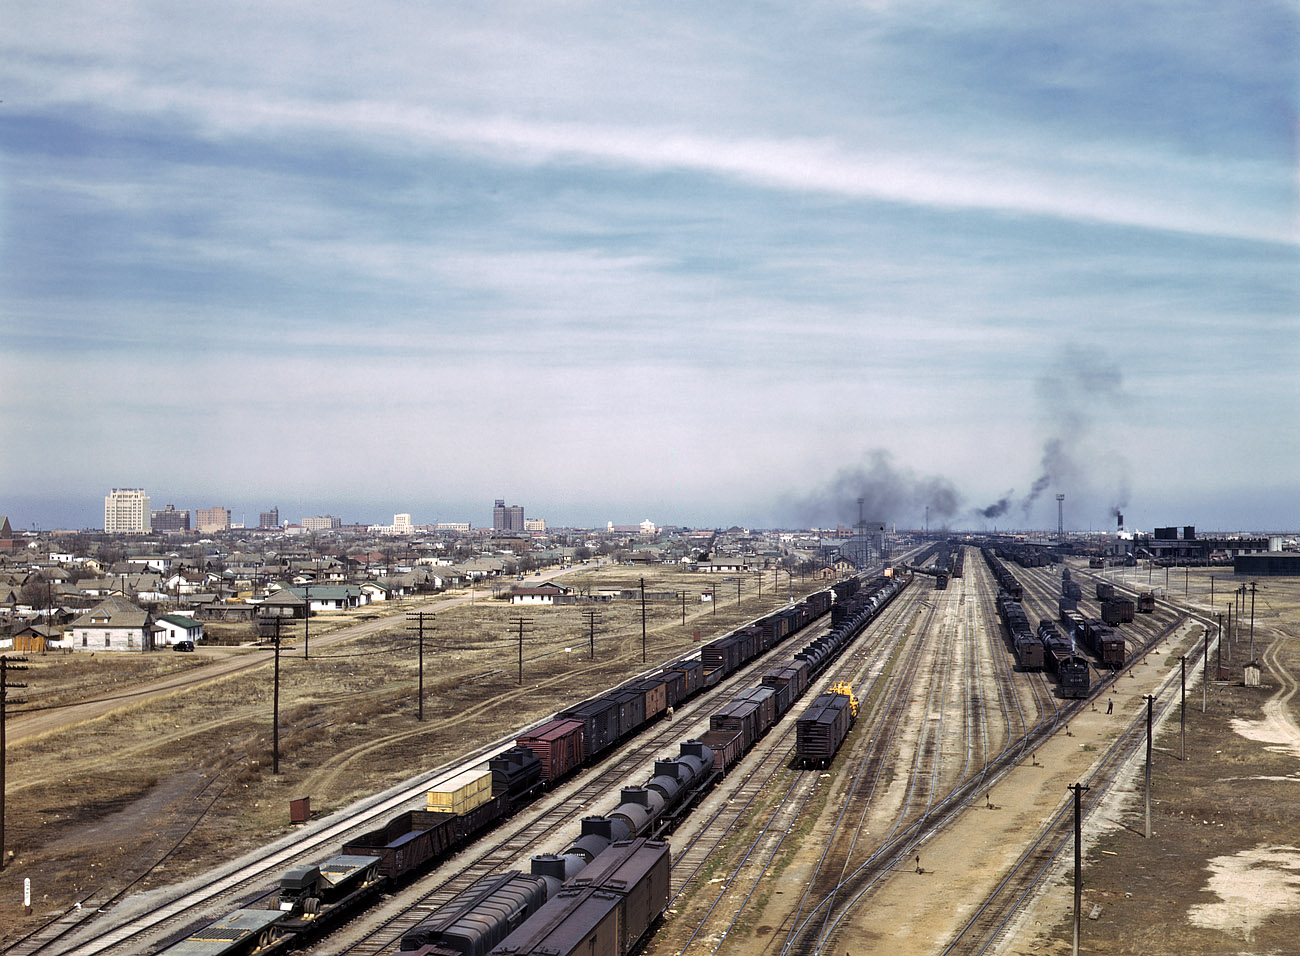 Amarillo, Texas, in March 1943. "General view of the city and the Atchison, Topeka, and Santa Fe Railroad." View full size | Or even bigger. 4x5 Kodachrome transparency by Jack Delano. More Amarillo here and here.